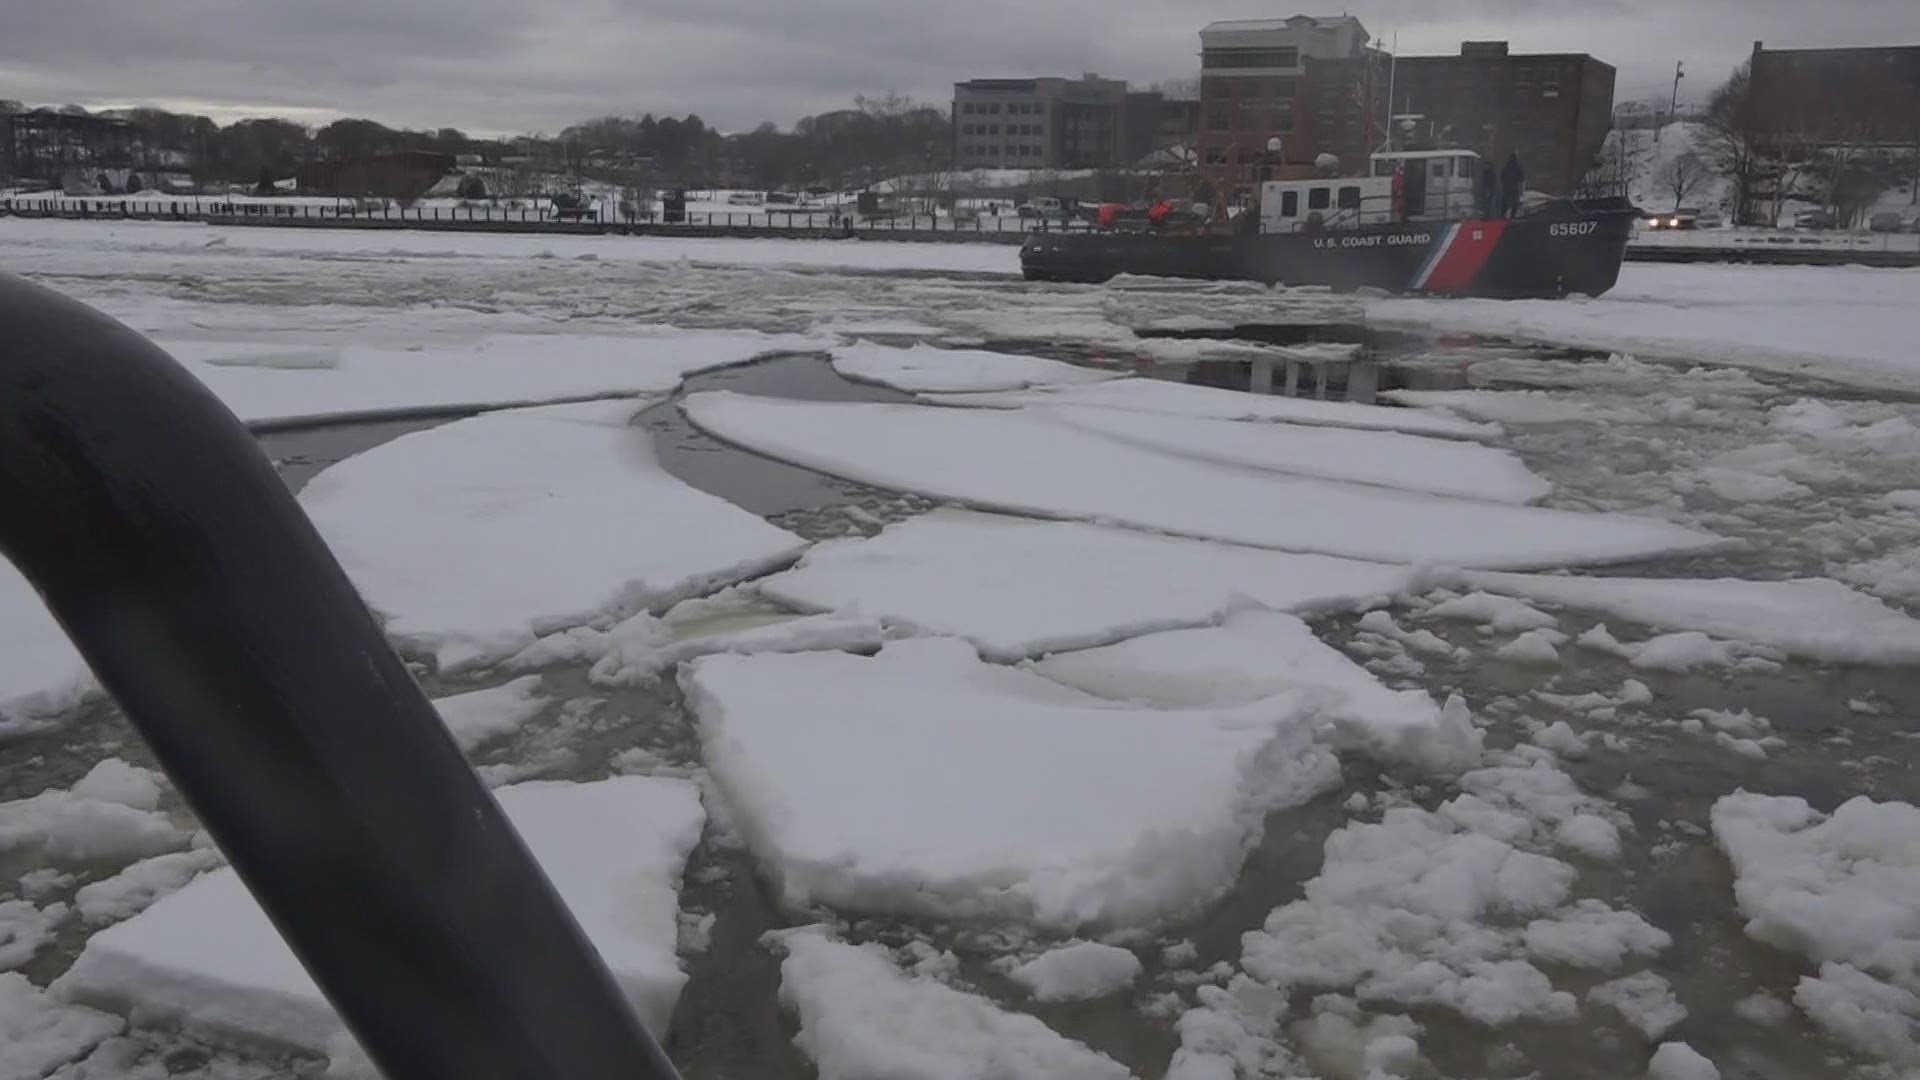 Three Coast Guard cutters cracked through the ice on Penobscot River from Bucksport to Bangor. It's an important job that has it's moments of fun.